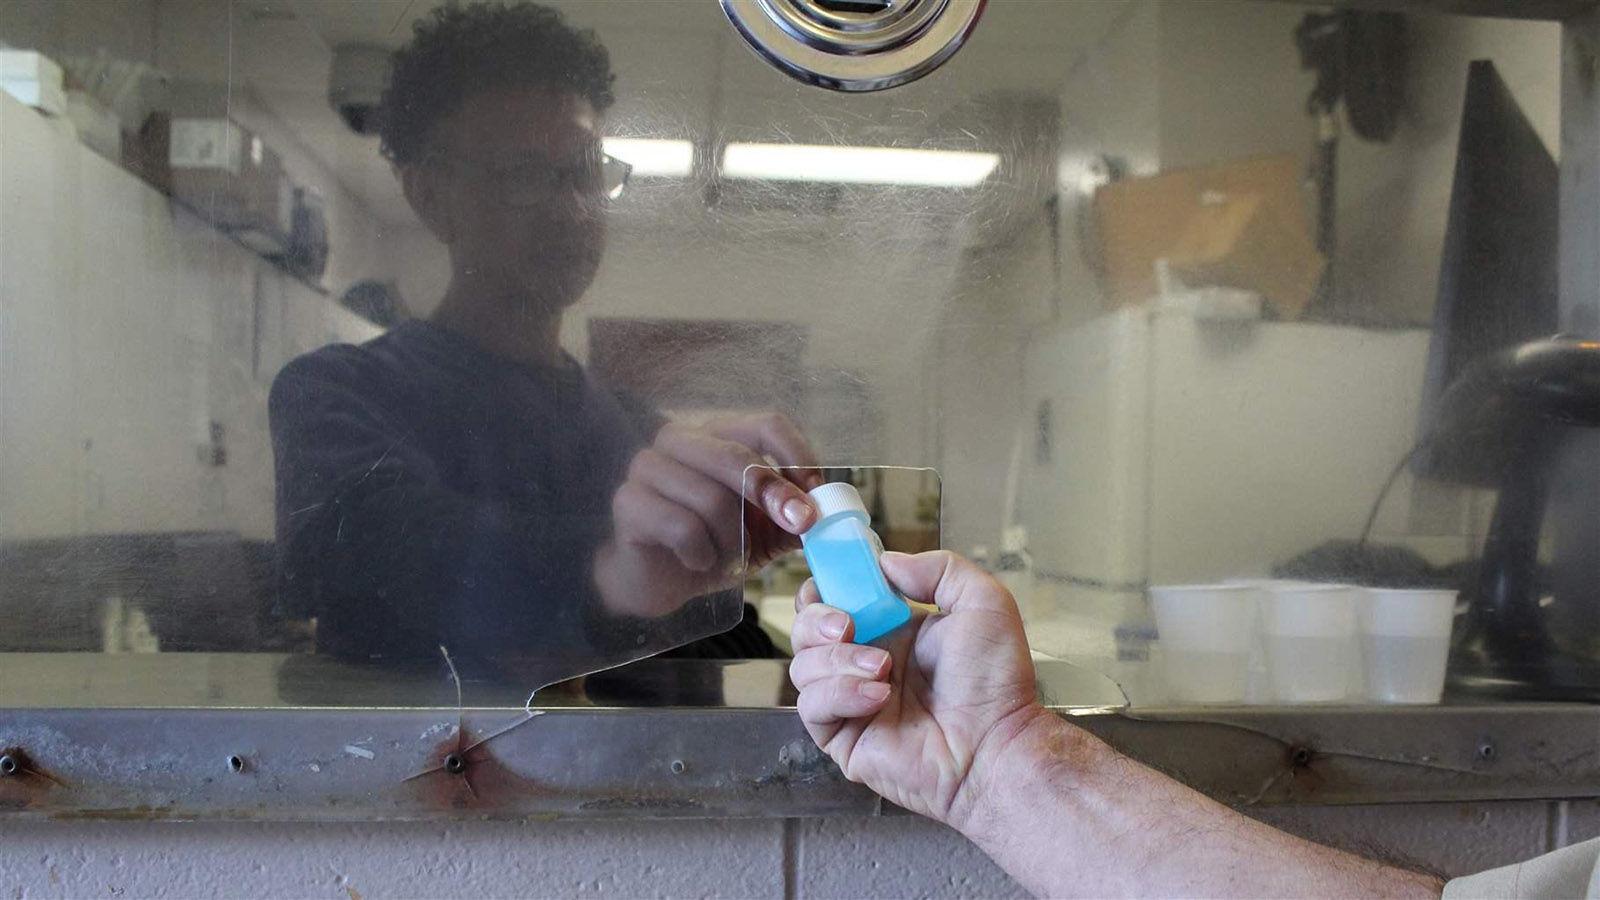 One state has figured out how to treat drug-addicted inmates